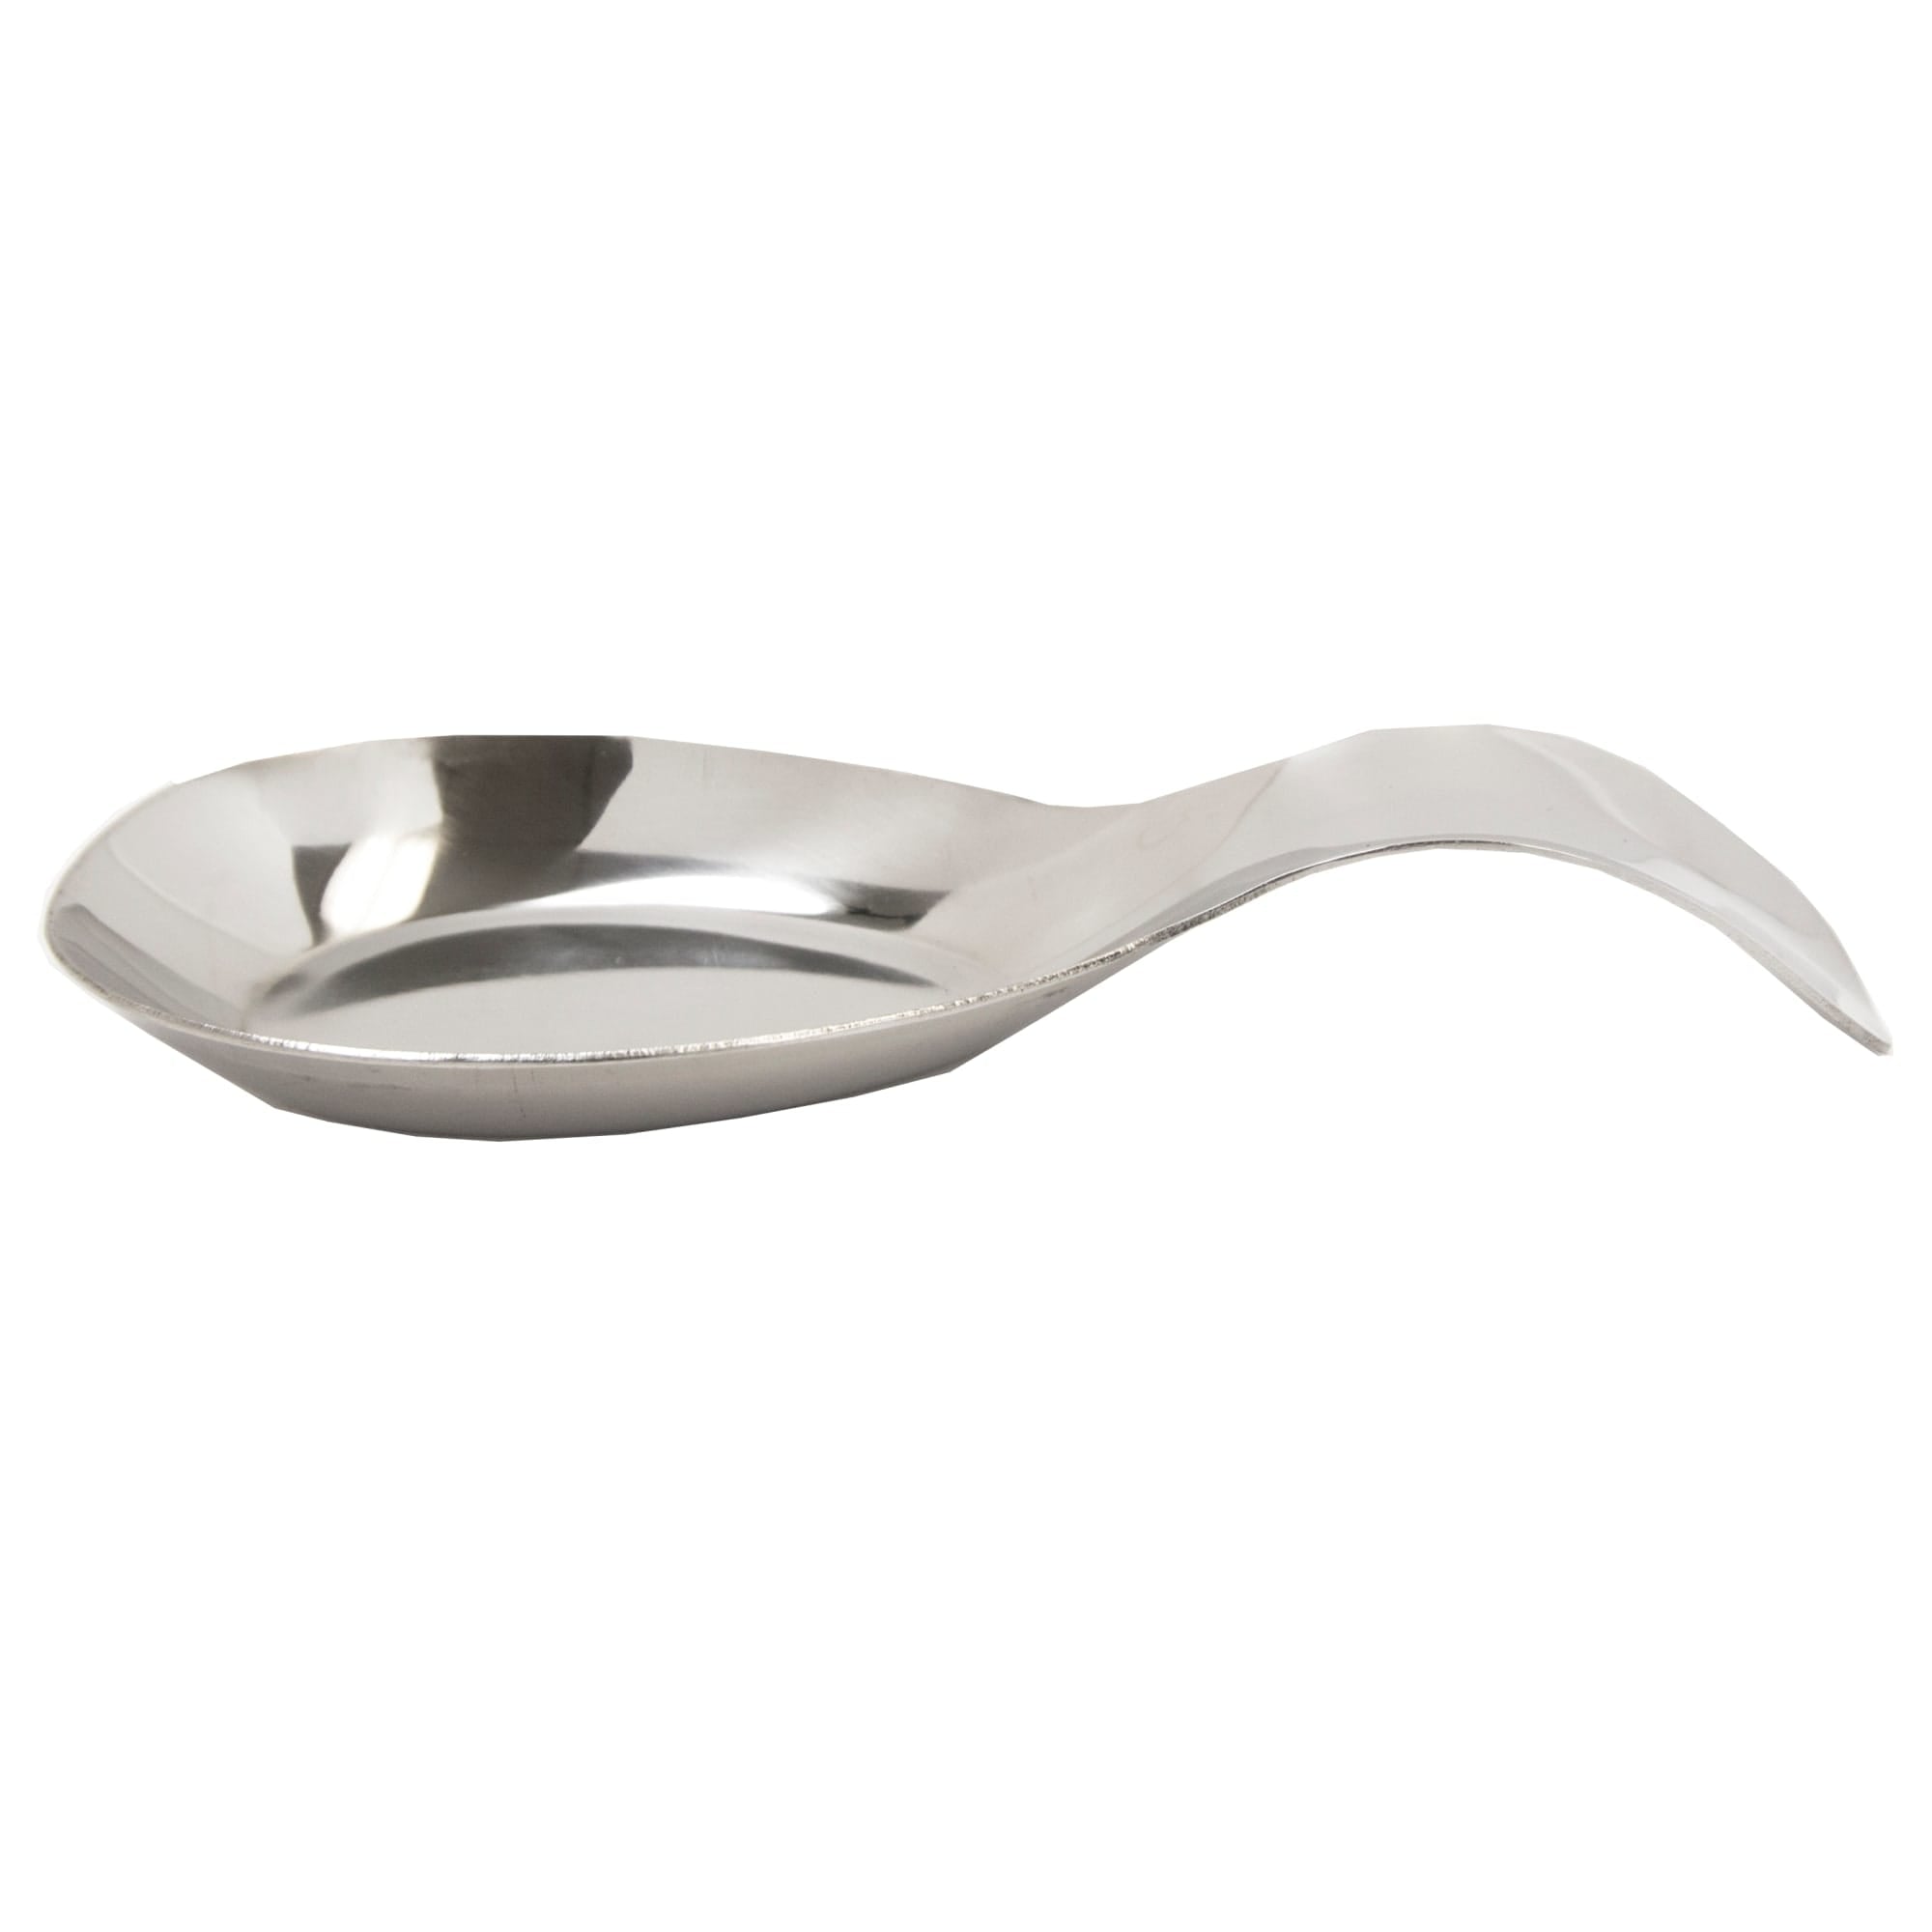 Home Basics No-Drip Curved Stainless Steel Spoon Rest , Silver $2.00 EACH, CASE PACK OF 12